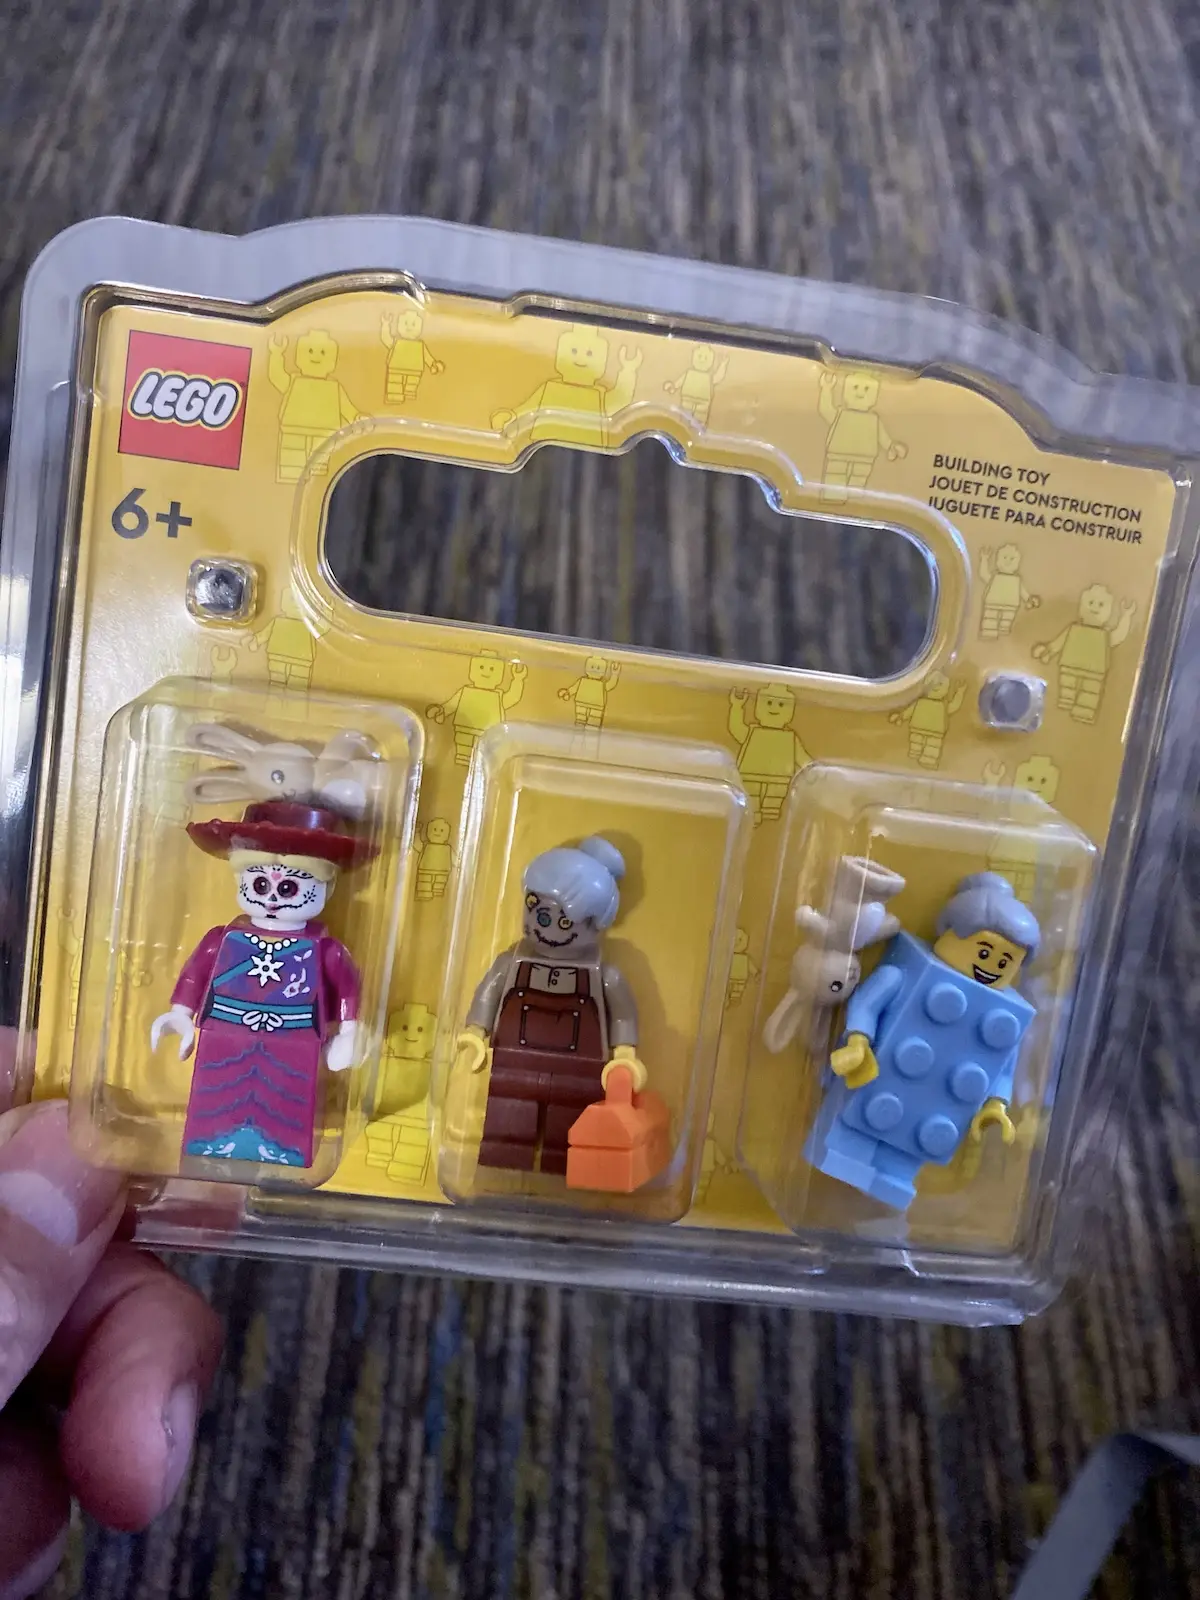 LEGO Minifigure Factory provides customizable figures for $12